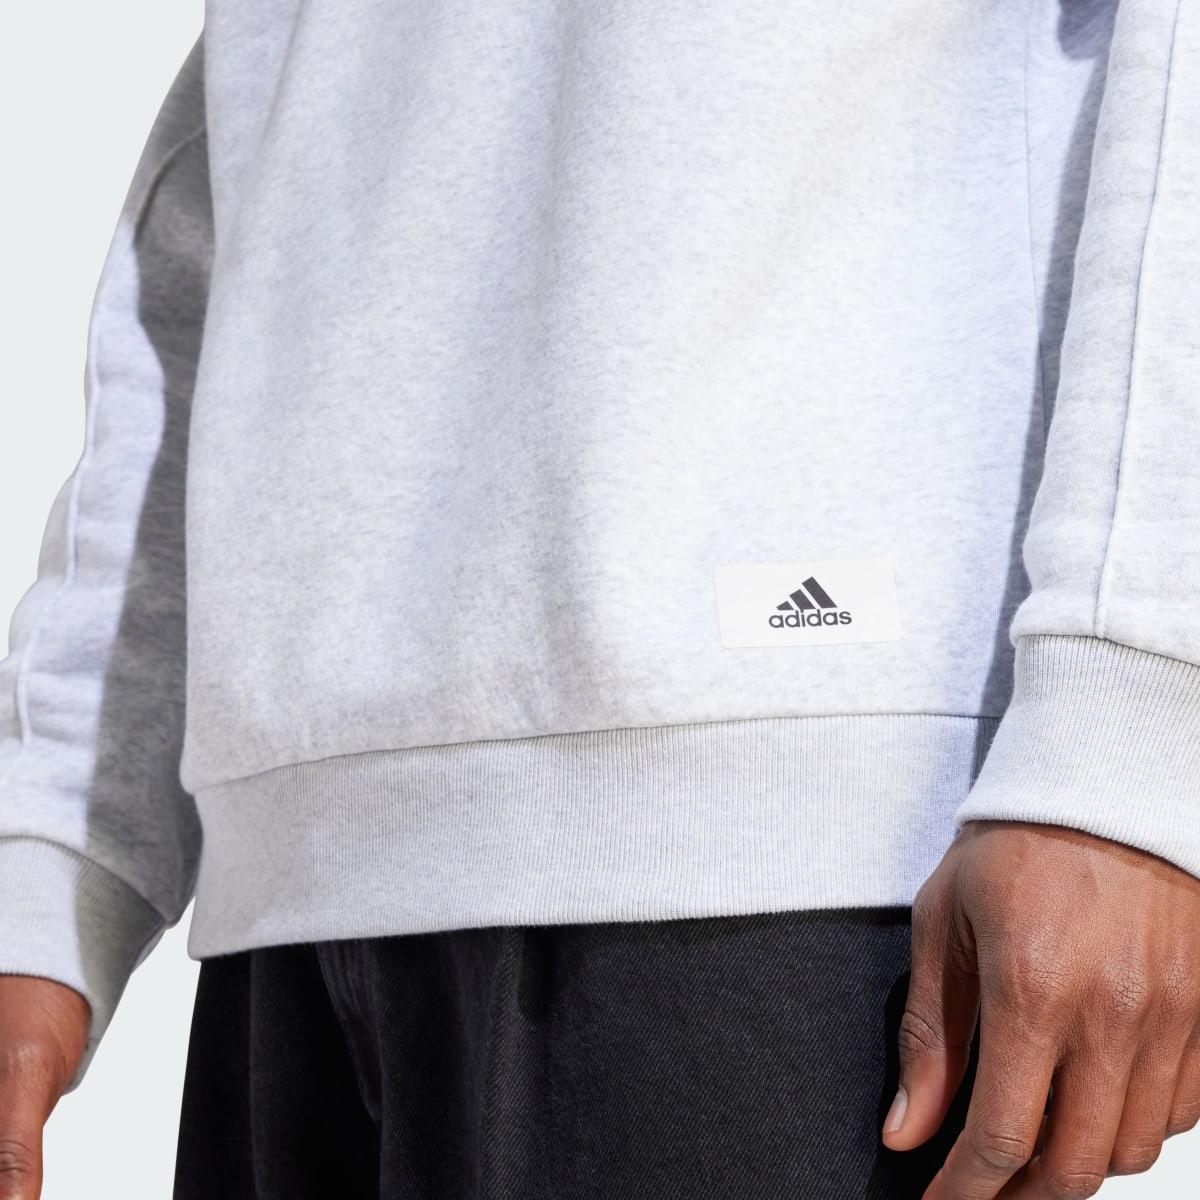 Adidas The Safe Place Hoodie. 6